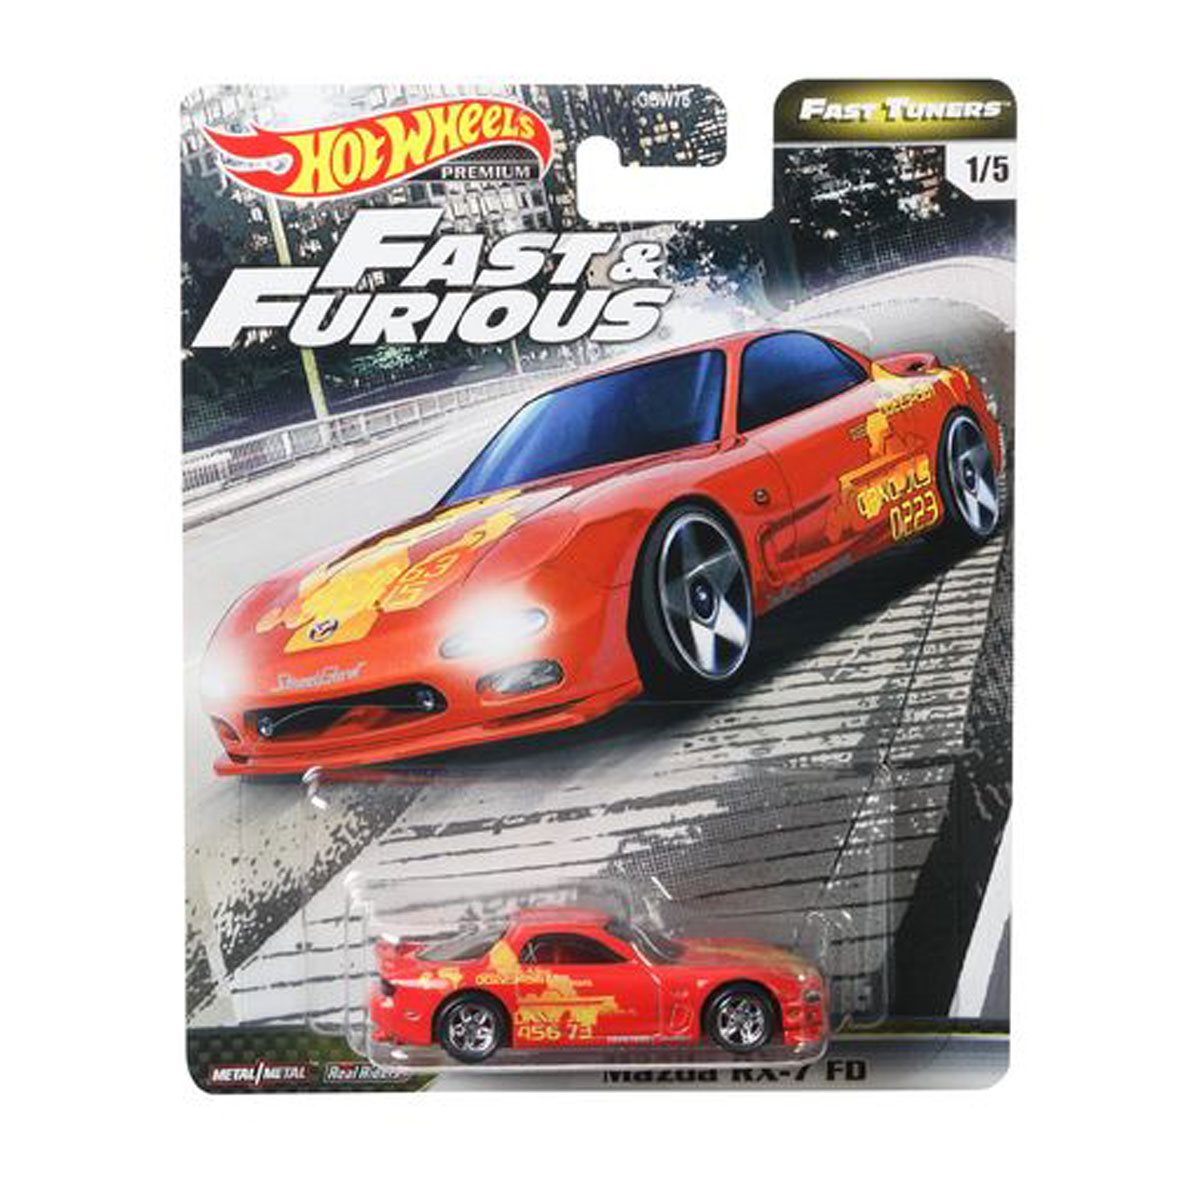 HOT WHEELS PREMIUM BRAND NEW 2020 F CASE FAST & FURIOUS FAST TUNERS 